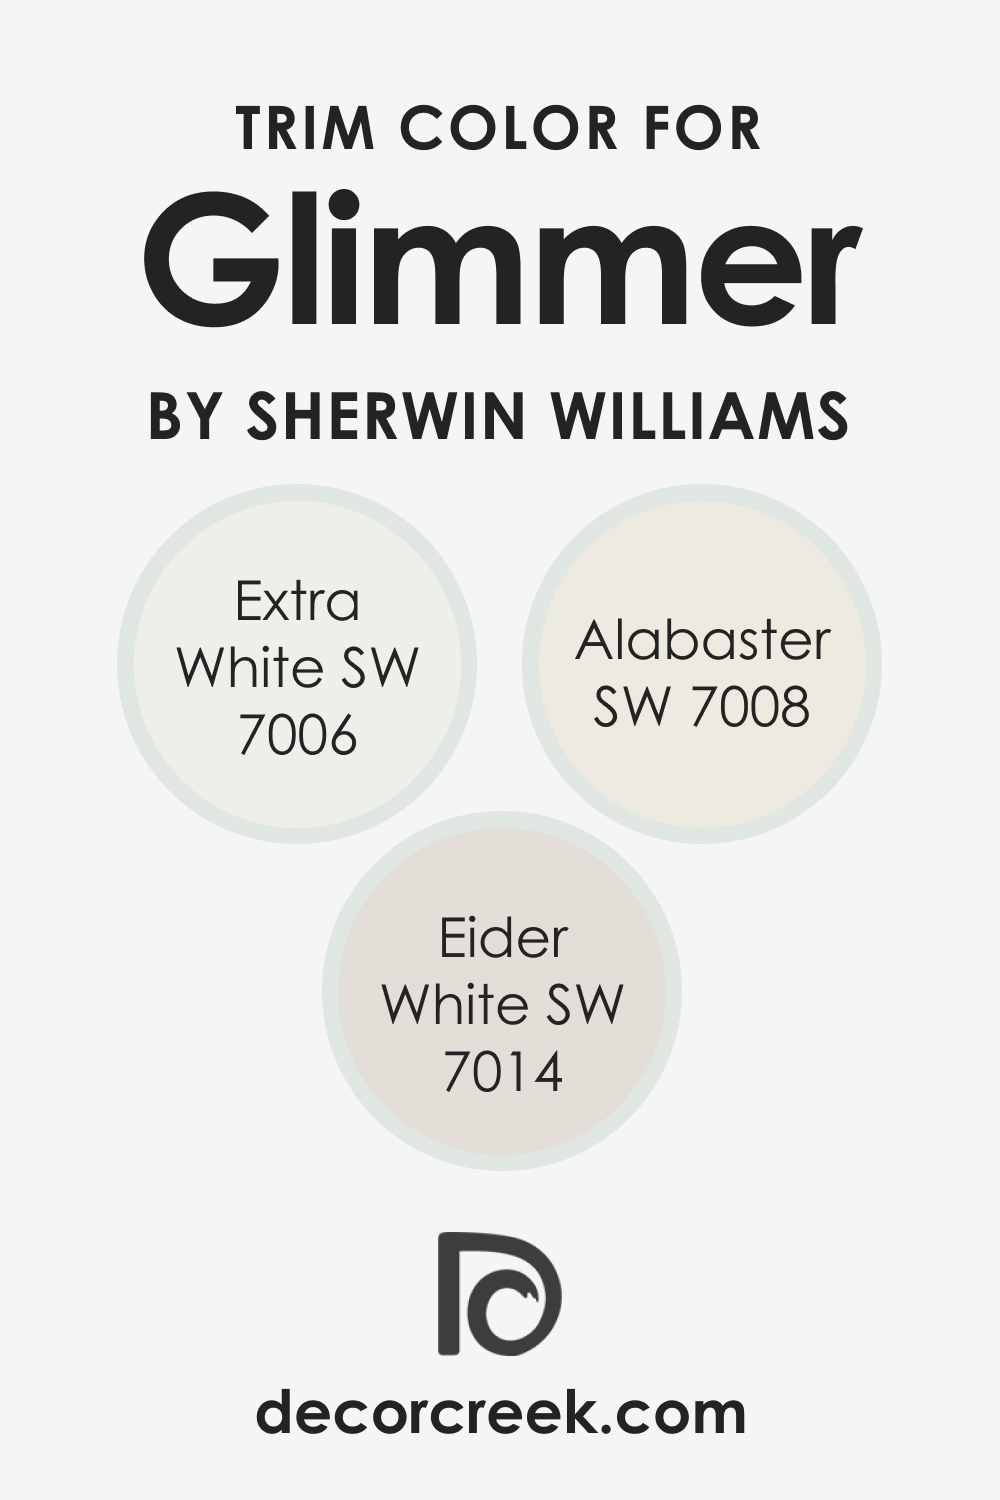 Trim Colors of SW 6476 Glimmer